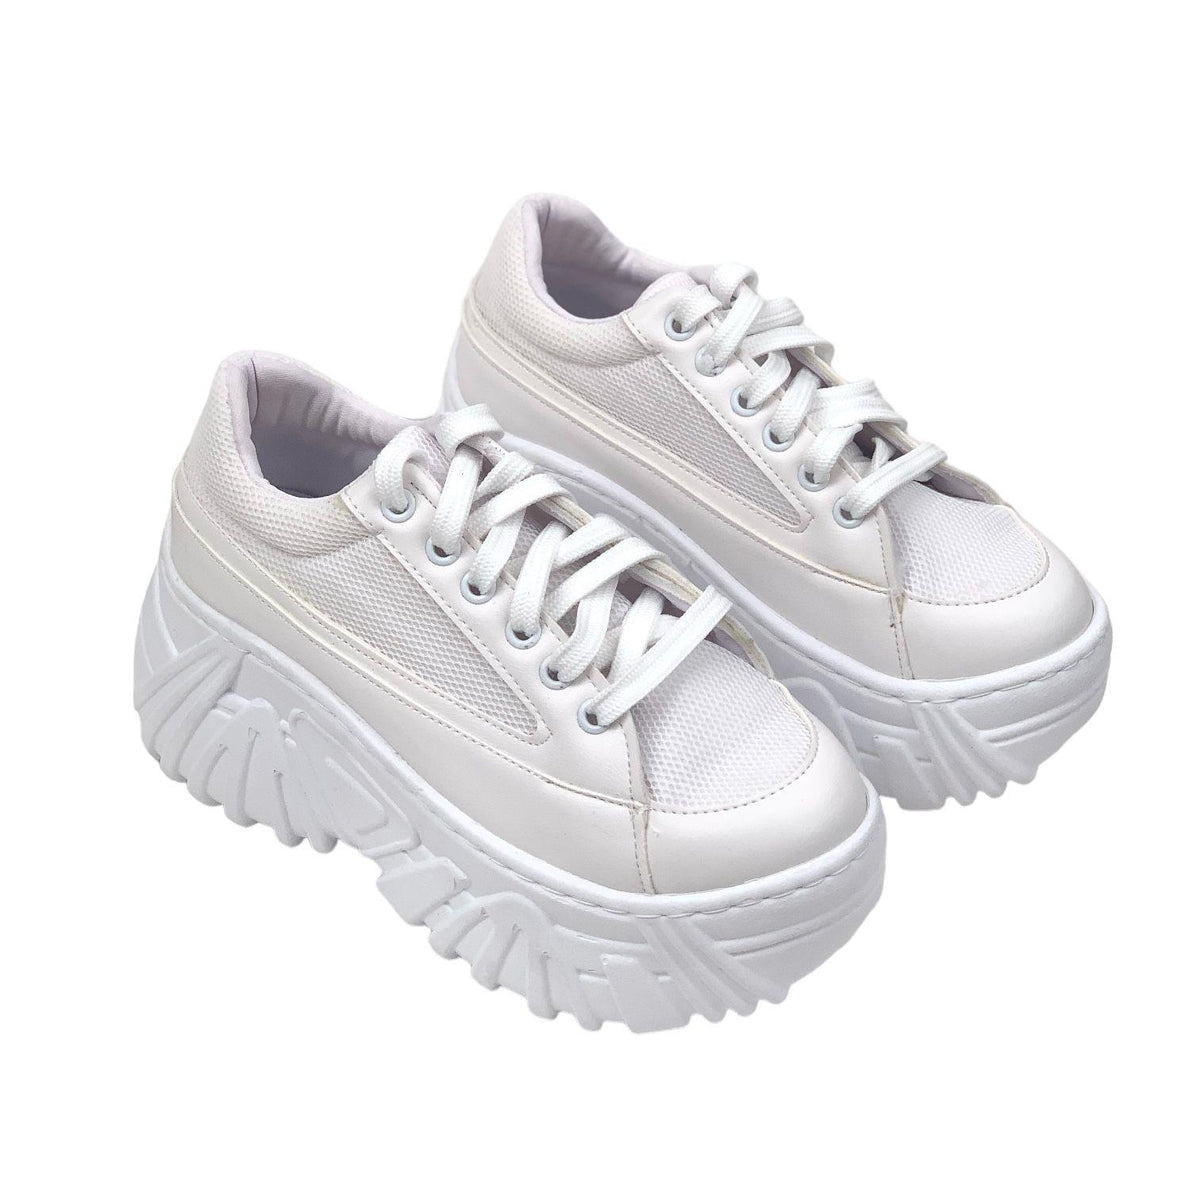 Women's shanny white high sole sneaker sports shoes